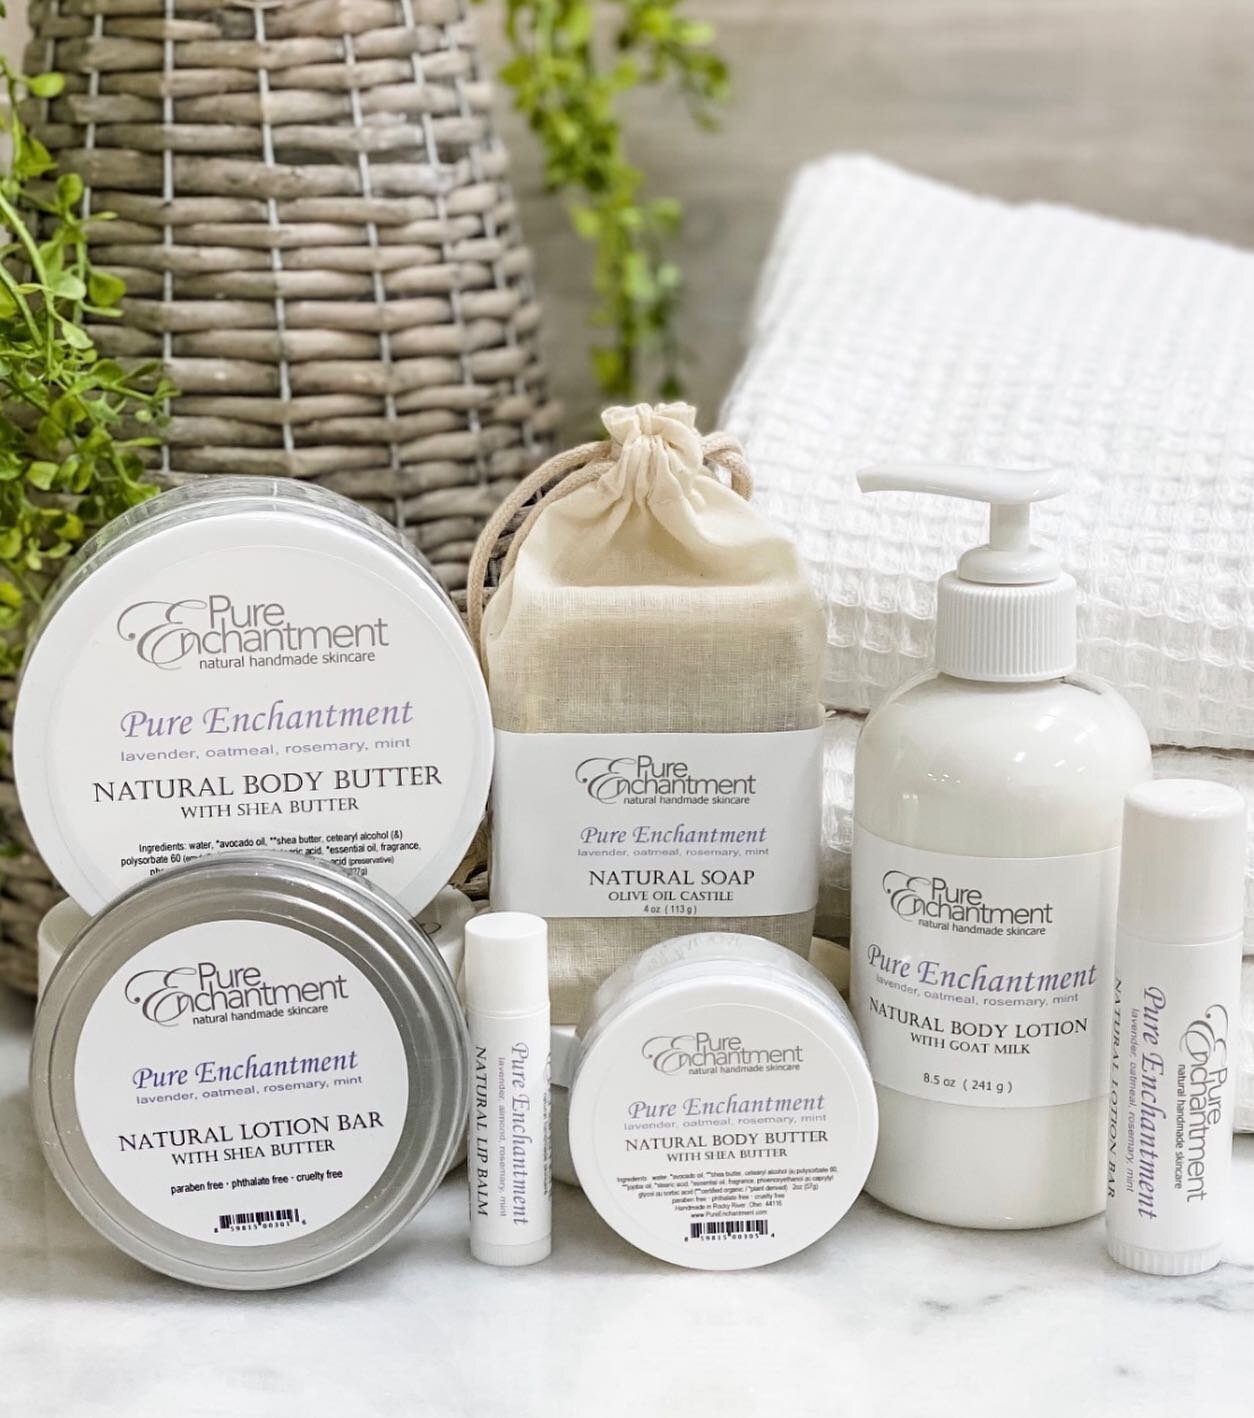 Pure Enchantment was started in August 2003, so it is the perfect
month to feature our signature scent, &quot;Pure Enchantment&quot;, a spa like blend of relaxing lavender, soothing oatmeal and refreshing rosemary and mint.
Enjoy 20% off our beloved 